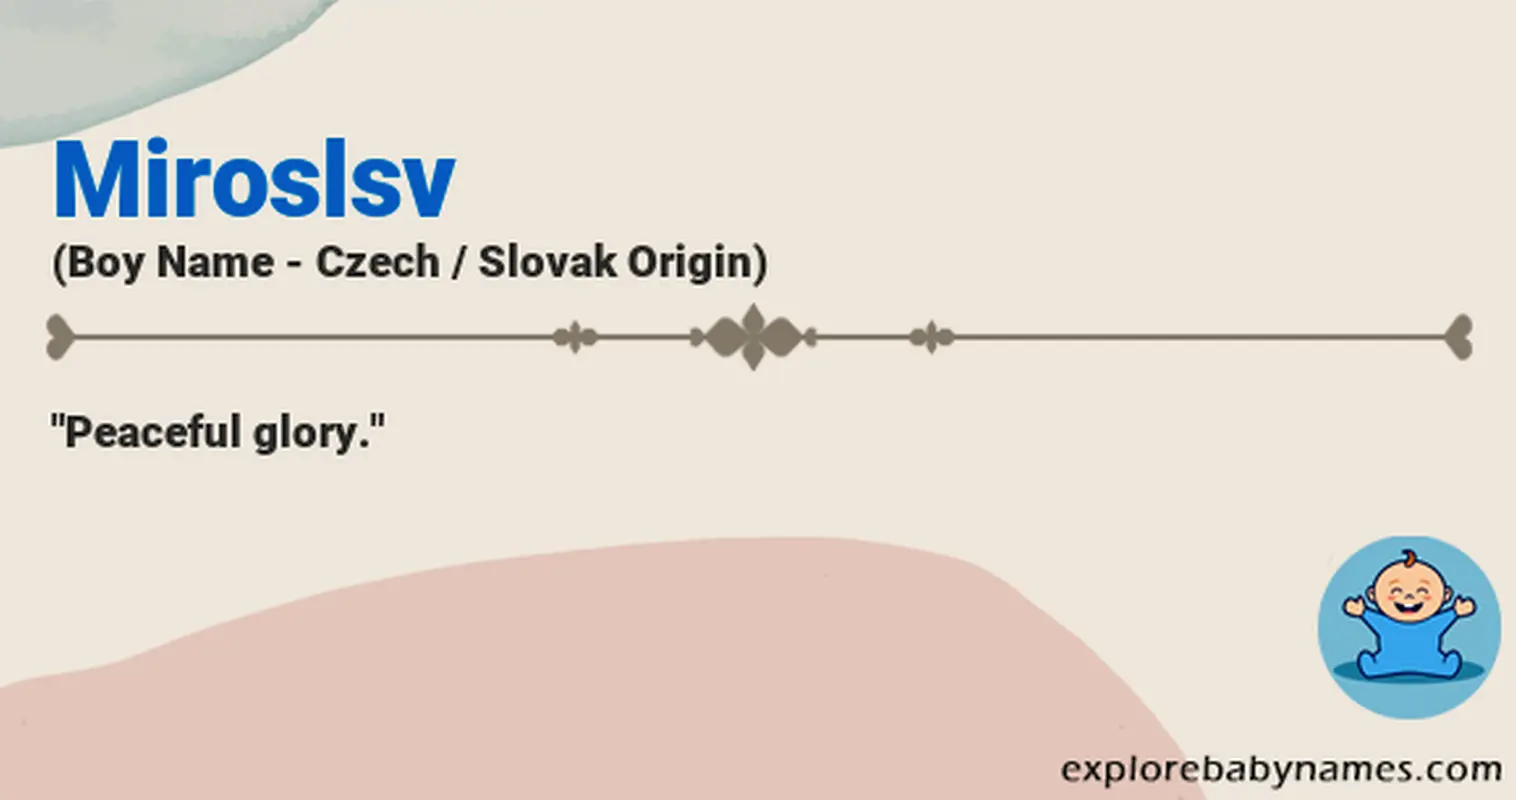 Meaning of Miroslsv